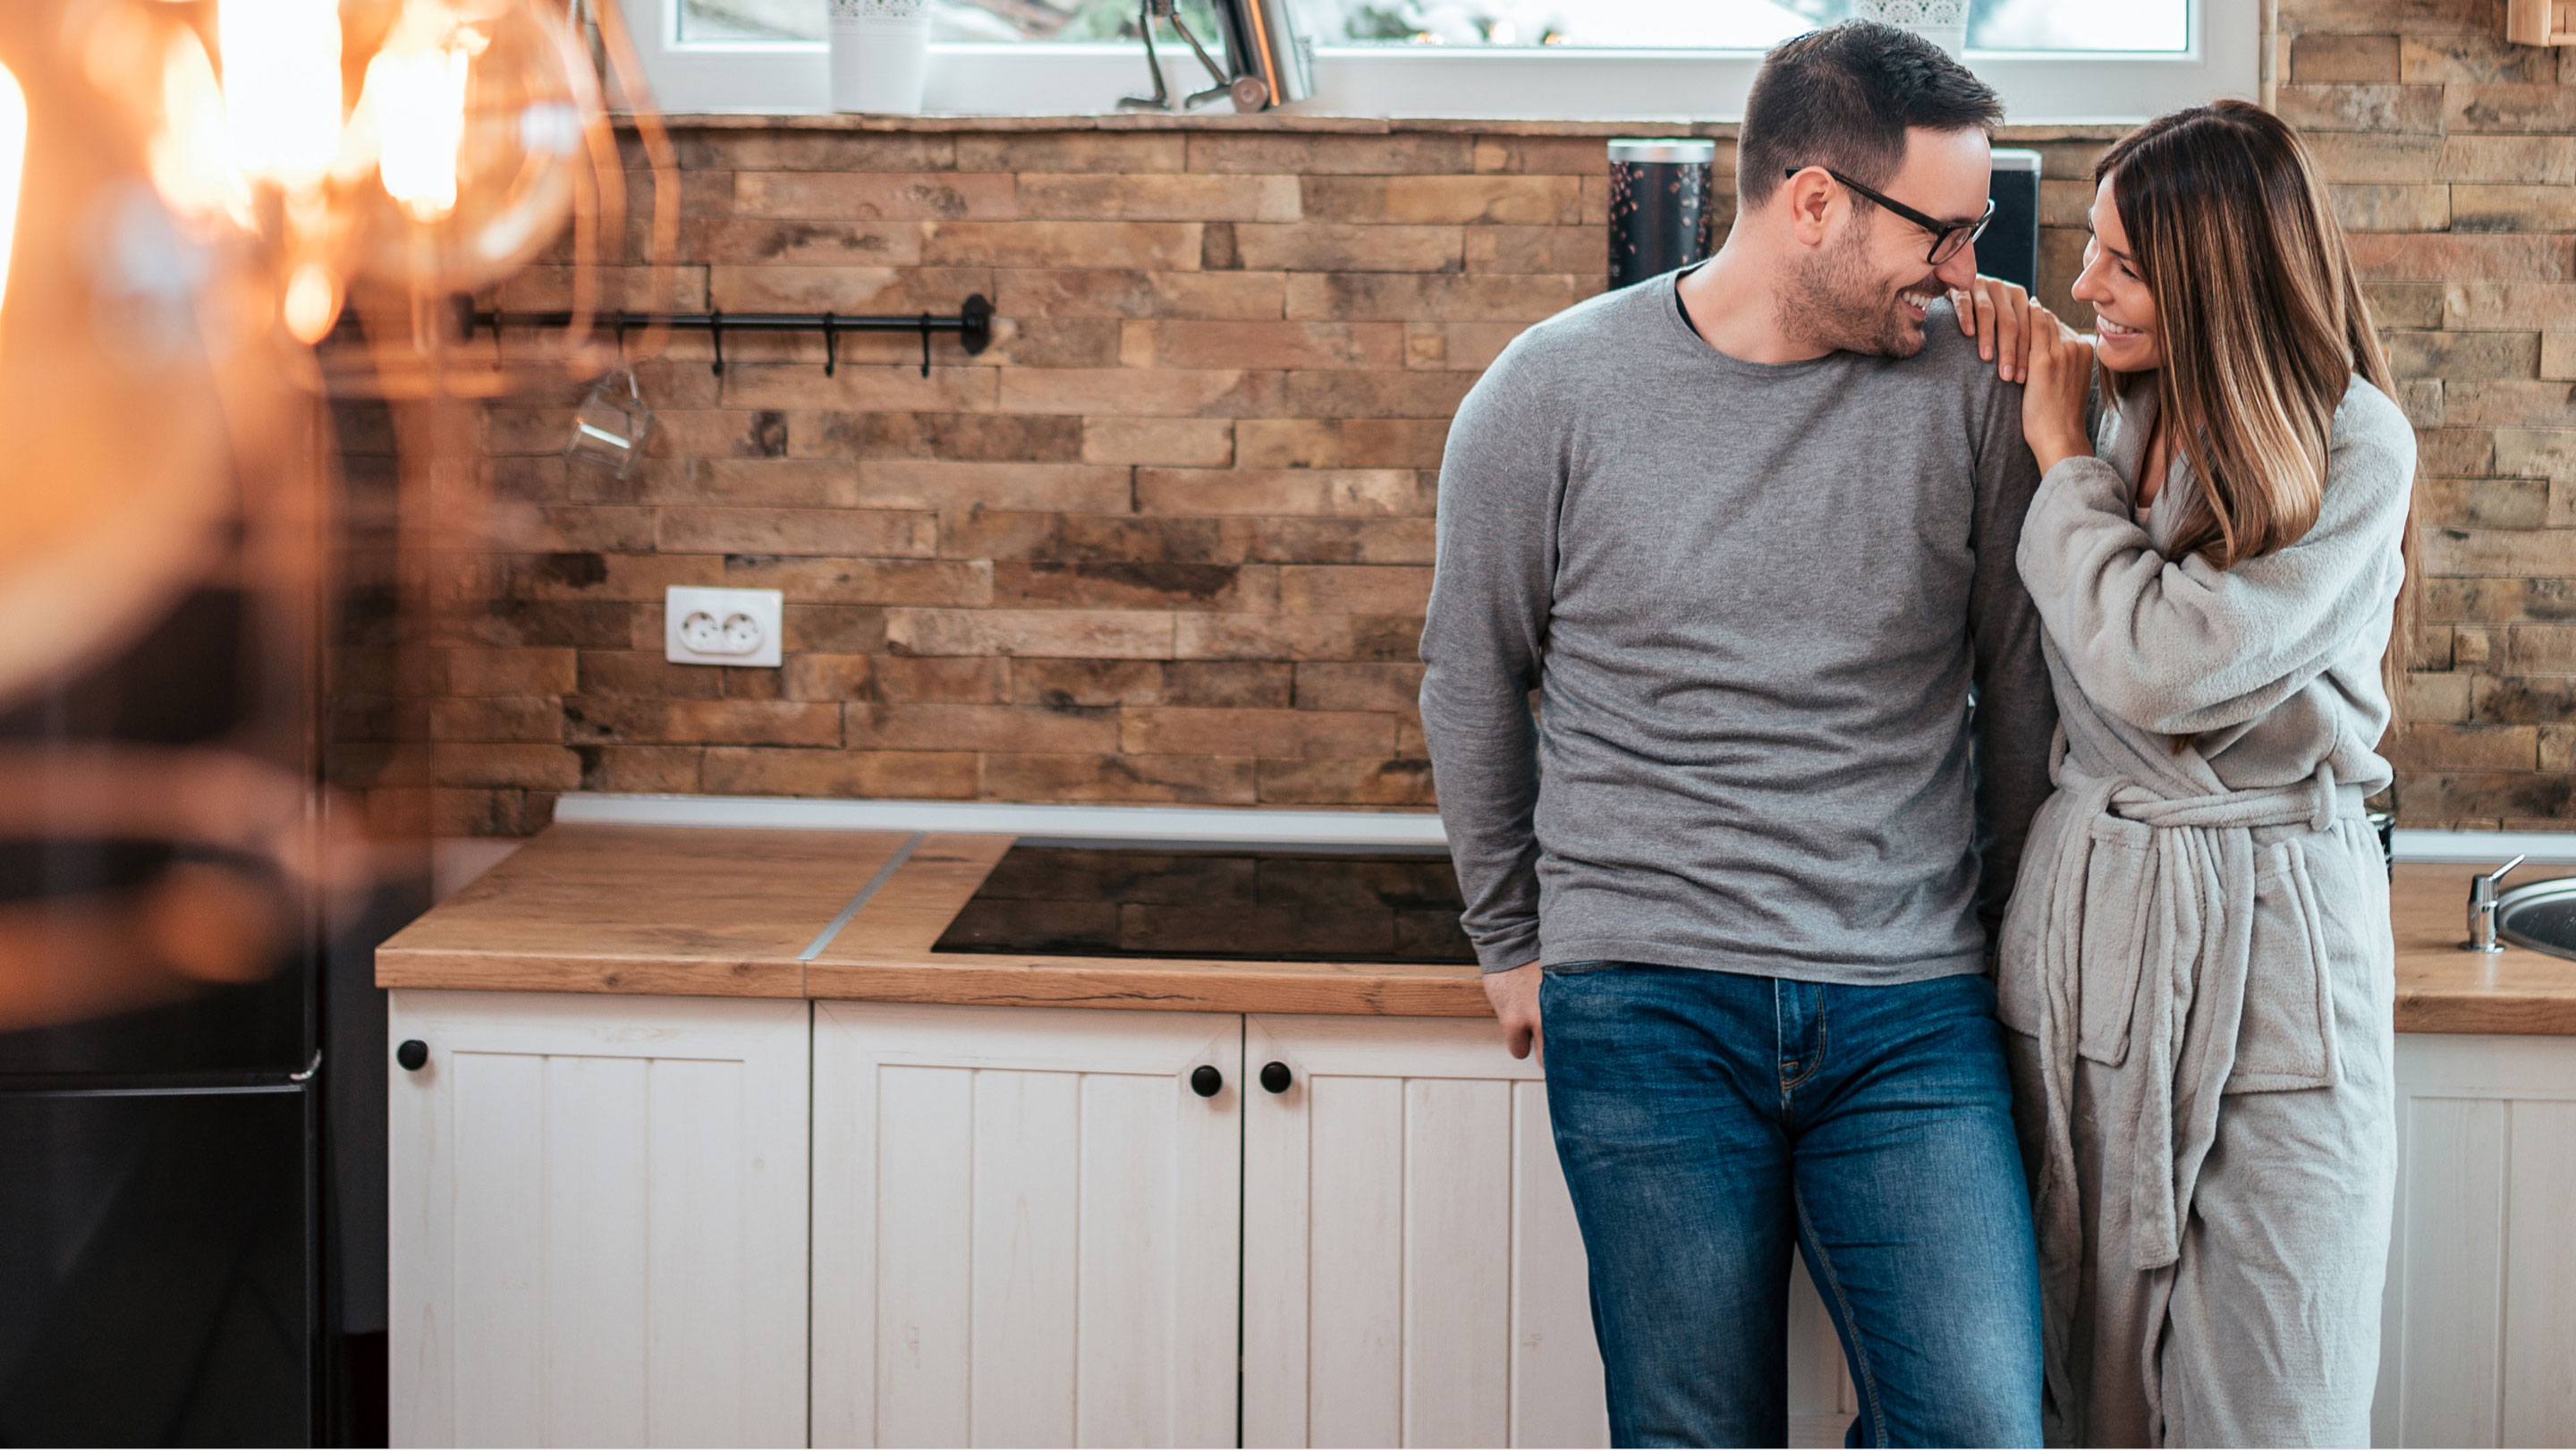 Couple looking lovingly at each other at kitchen sink